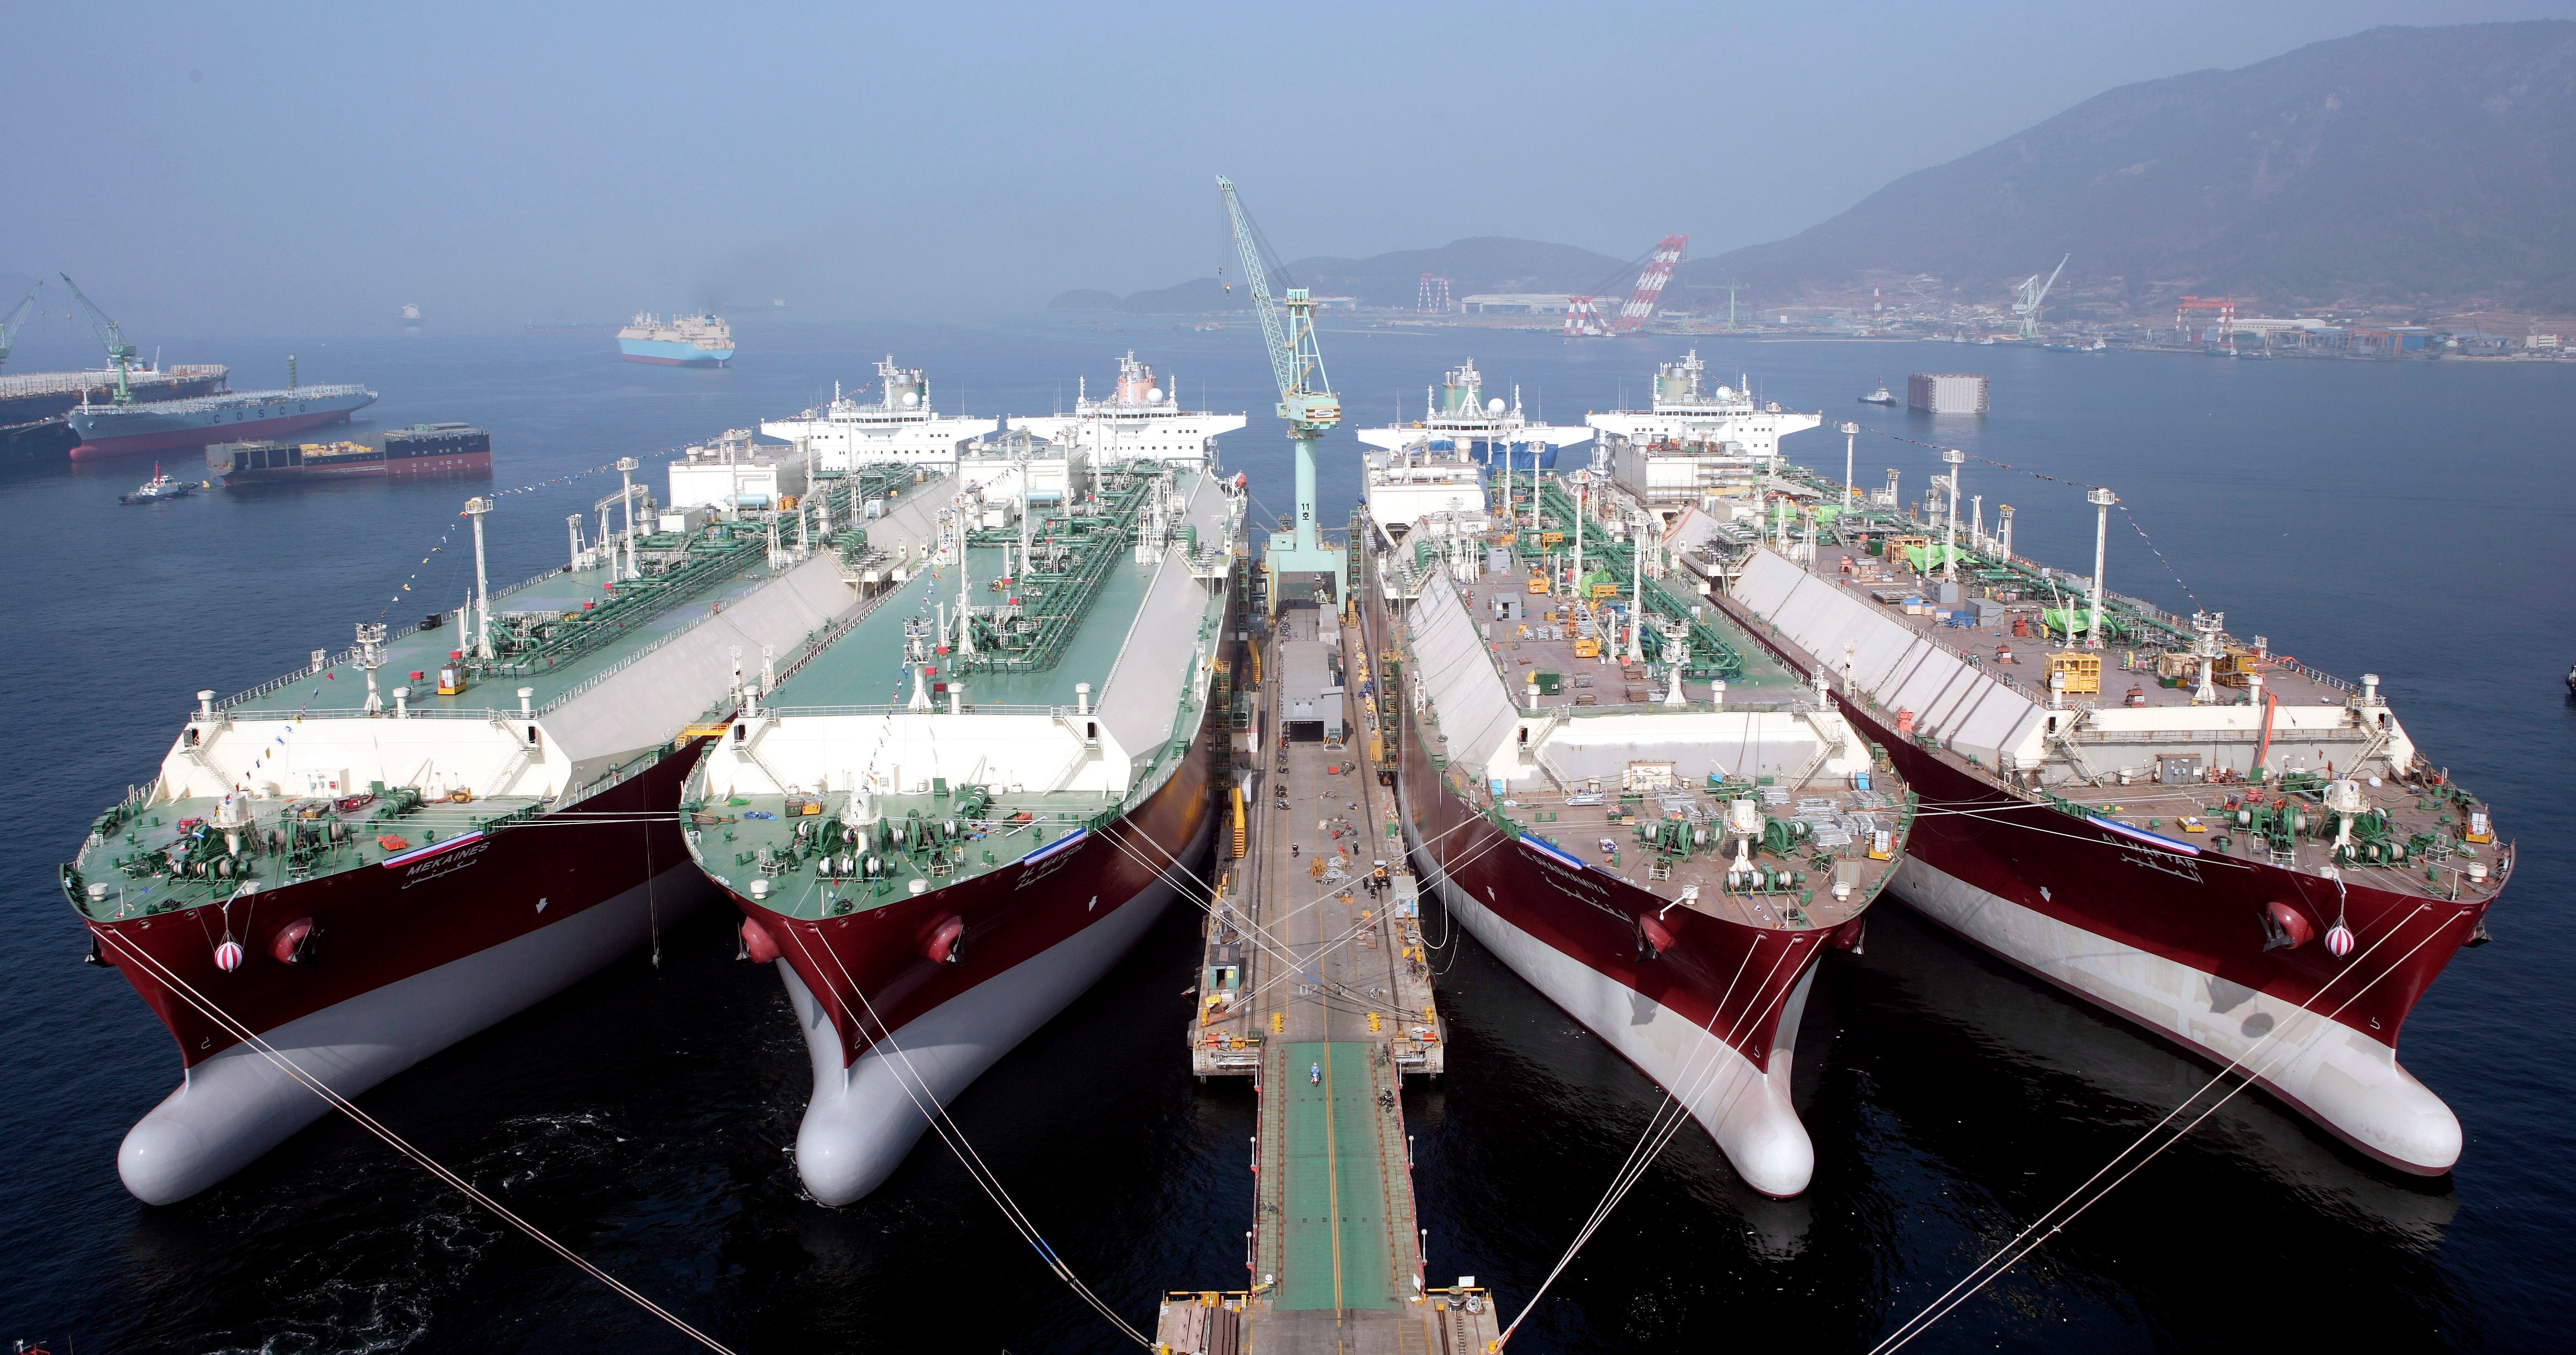 BRAND-NEW SHIPS. LNG carriers are docked at the Samsung Heavy Industries shipyard on Goje Island for a christening ceremony on February 9, 2009. File photo by Yonhap/EPA 